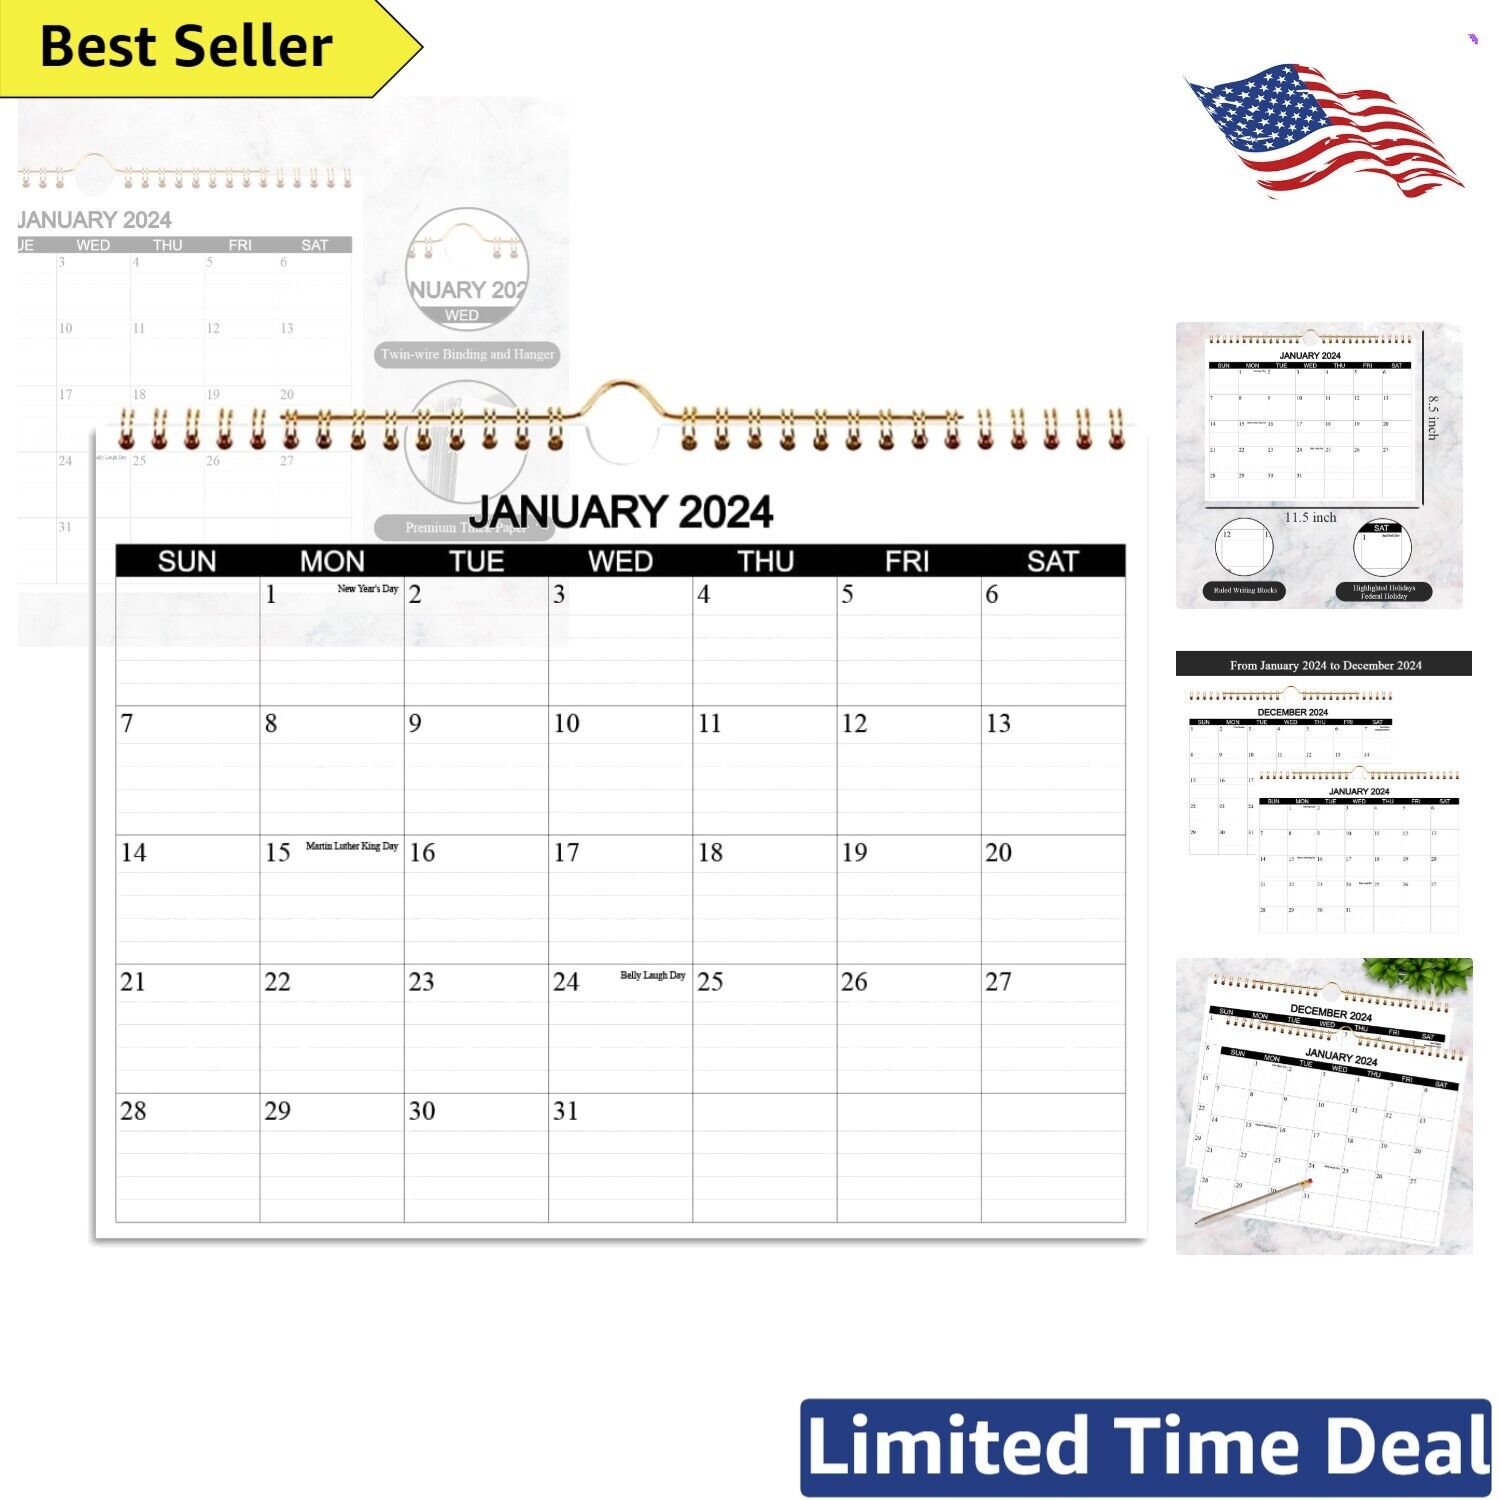 2024 Wall Calendar - Eye-Catching Design with Federal Holidays - 8.5 x 11 Inches